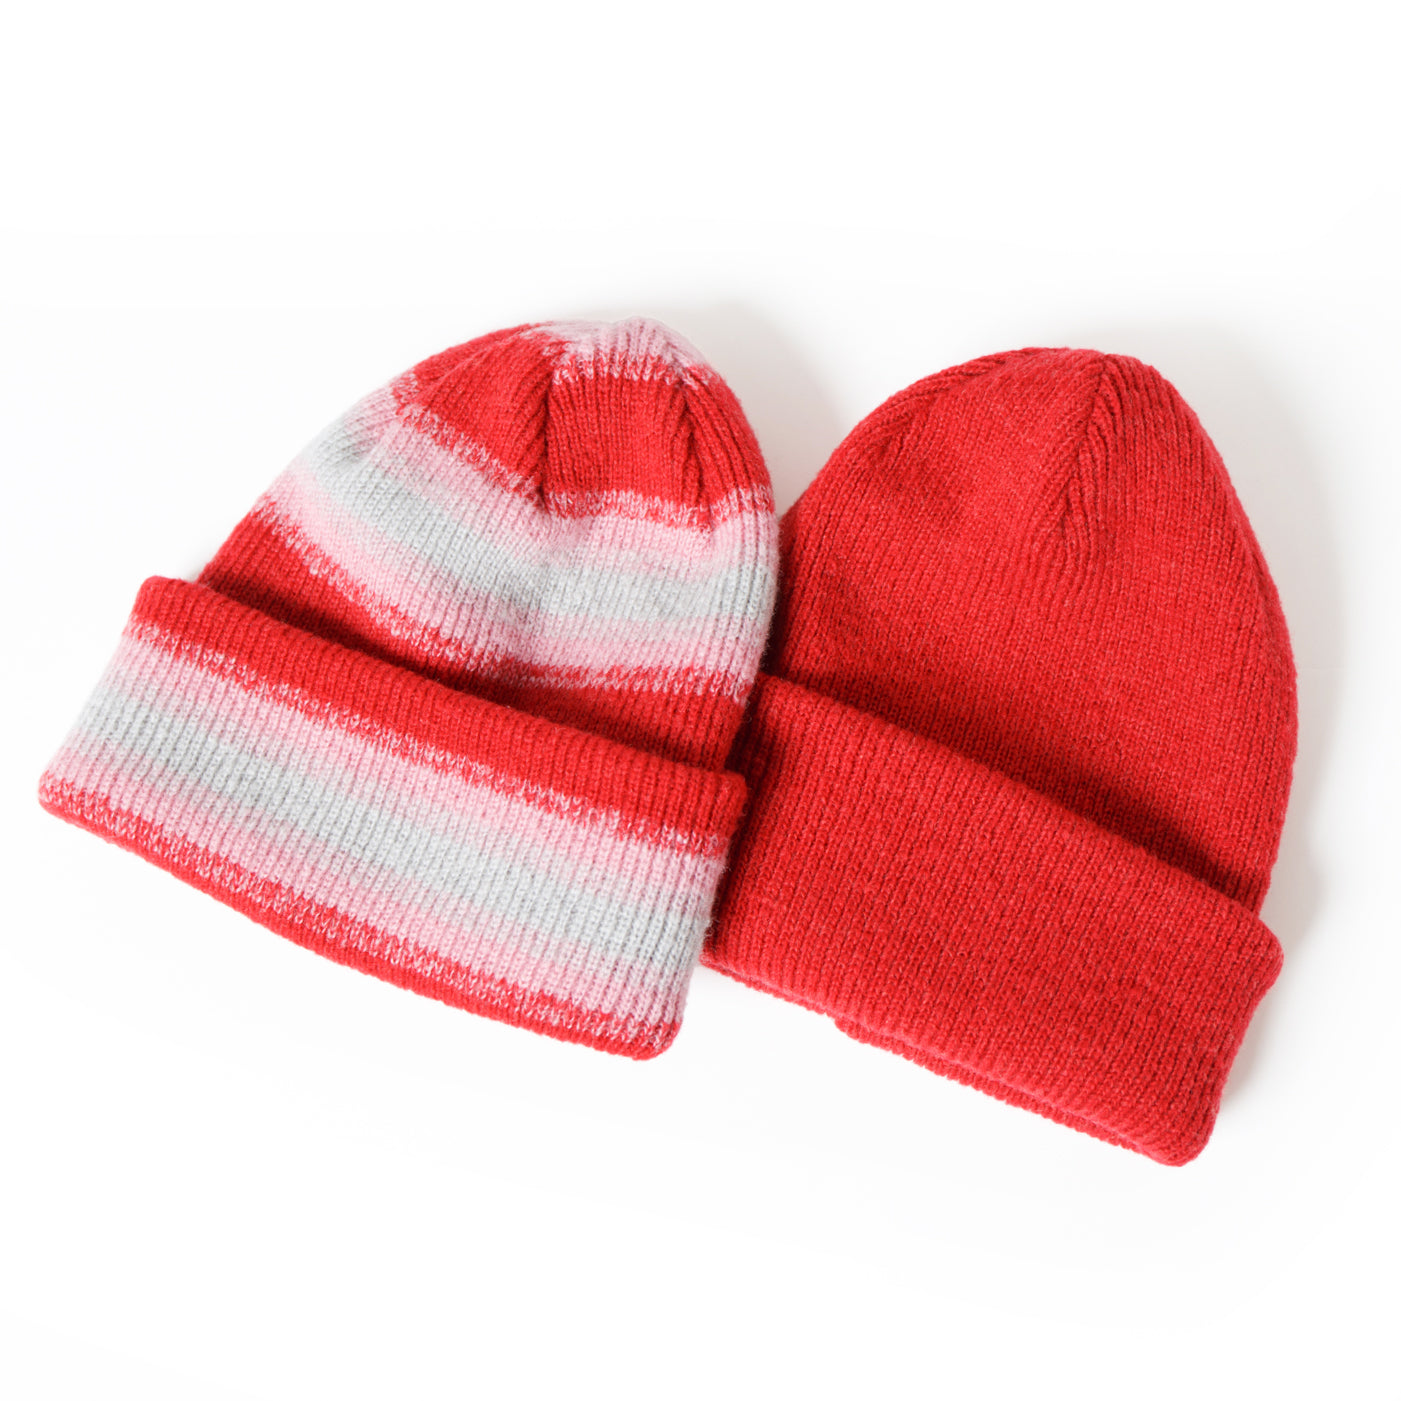 No:RL-24-002W_RED | Name:Gradation Knit Cap | Color:Red【RACAL_ラカル】【入荷予定アイテム・入荷連絡可能】